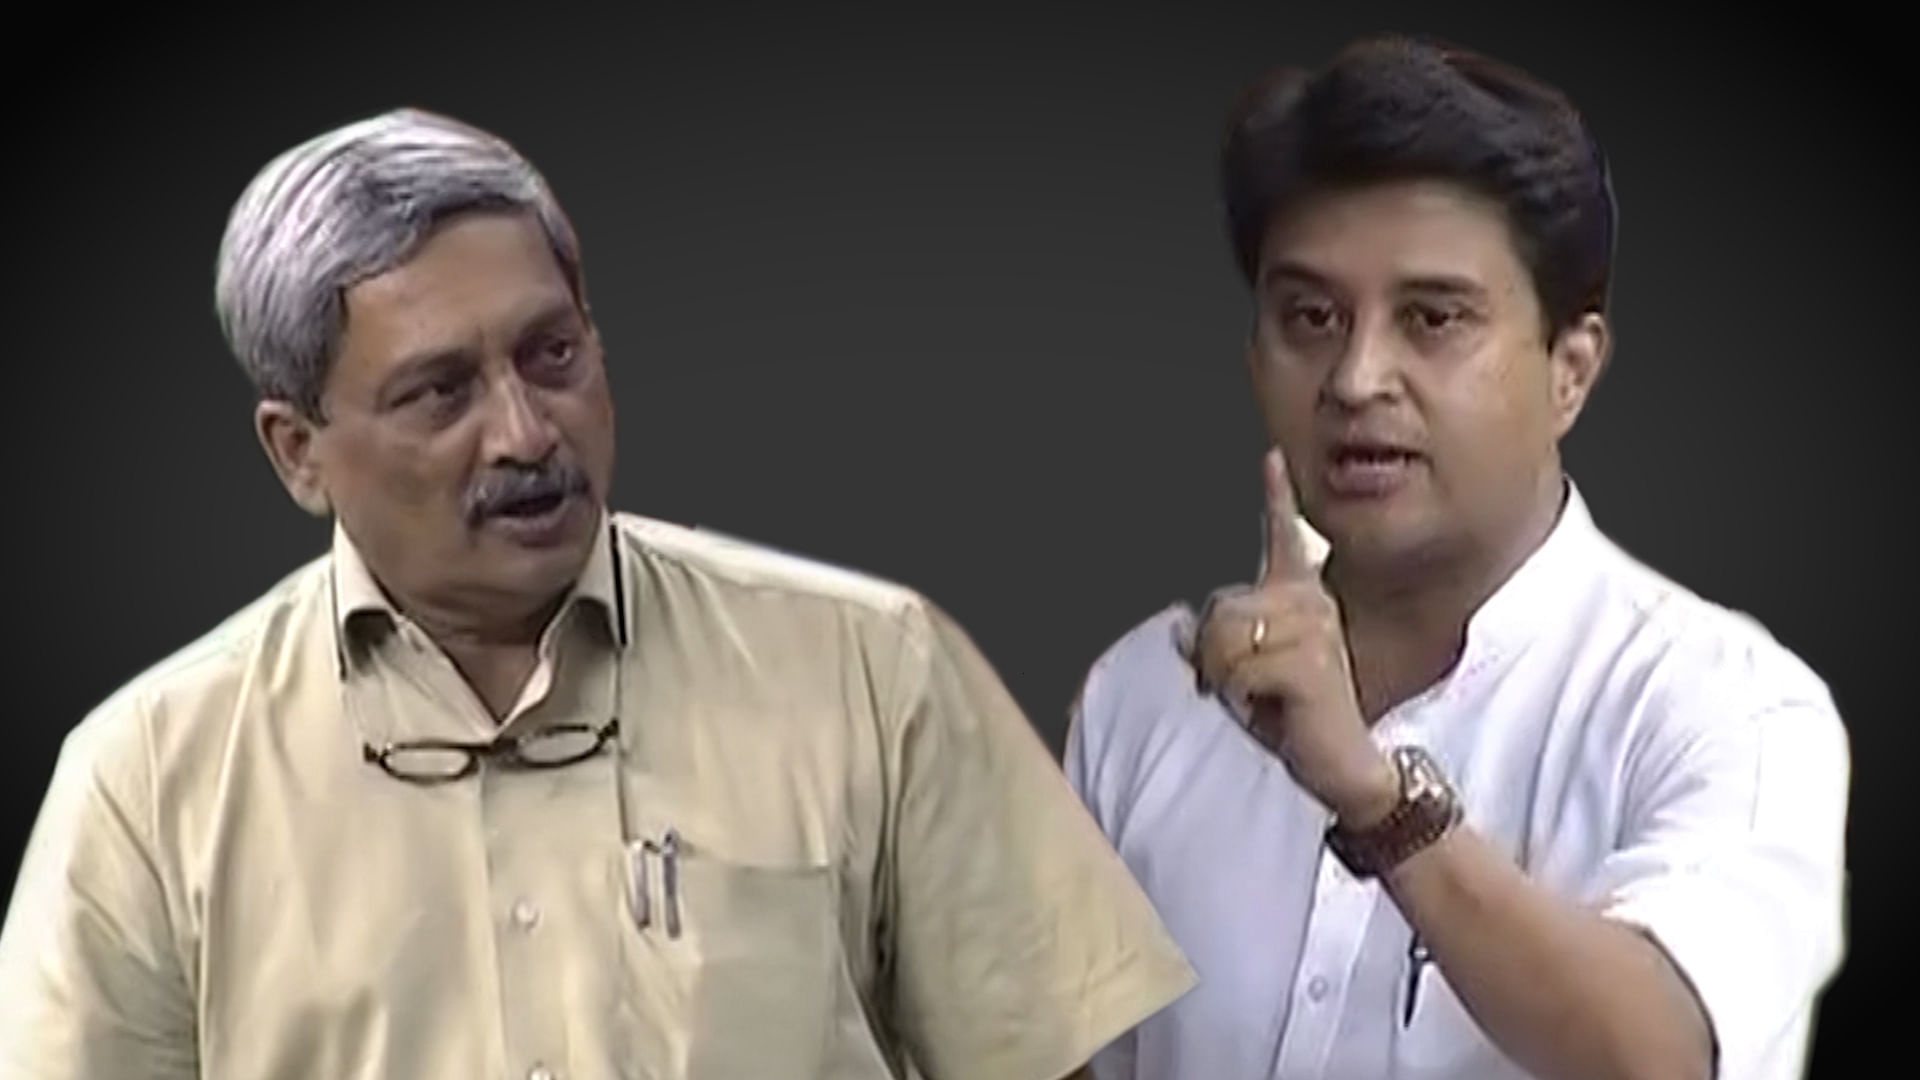 Defence Minister Manohar Parrikar (left) took on a barrage of attacks from Congress MP Jyotiraditya Scindia (right) in the Lok Sabha on Friday. (Photo: LSTV screengrab/altered by <b>The Quint</b>)